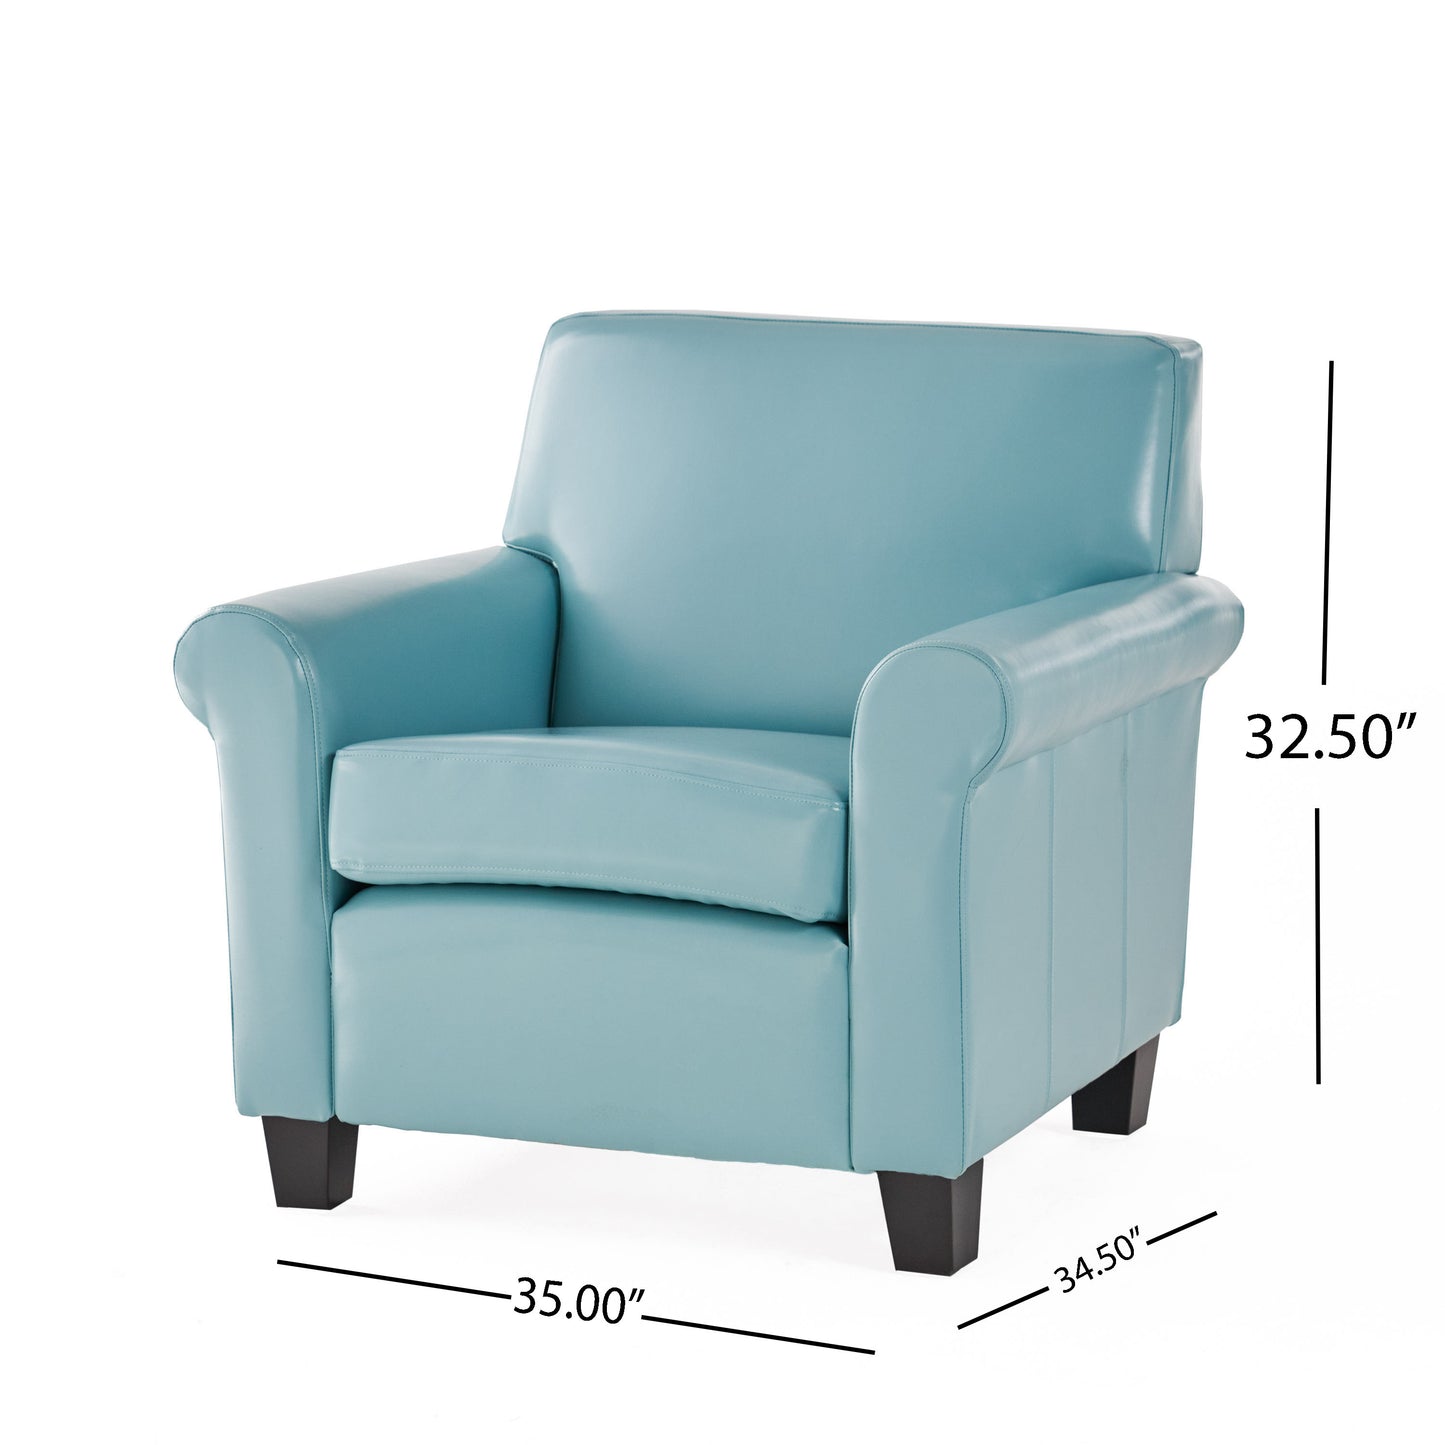 Addison Contemporary Teal Blue Leather Club Chair with Scrolled Arms